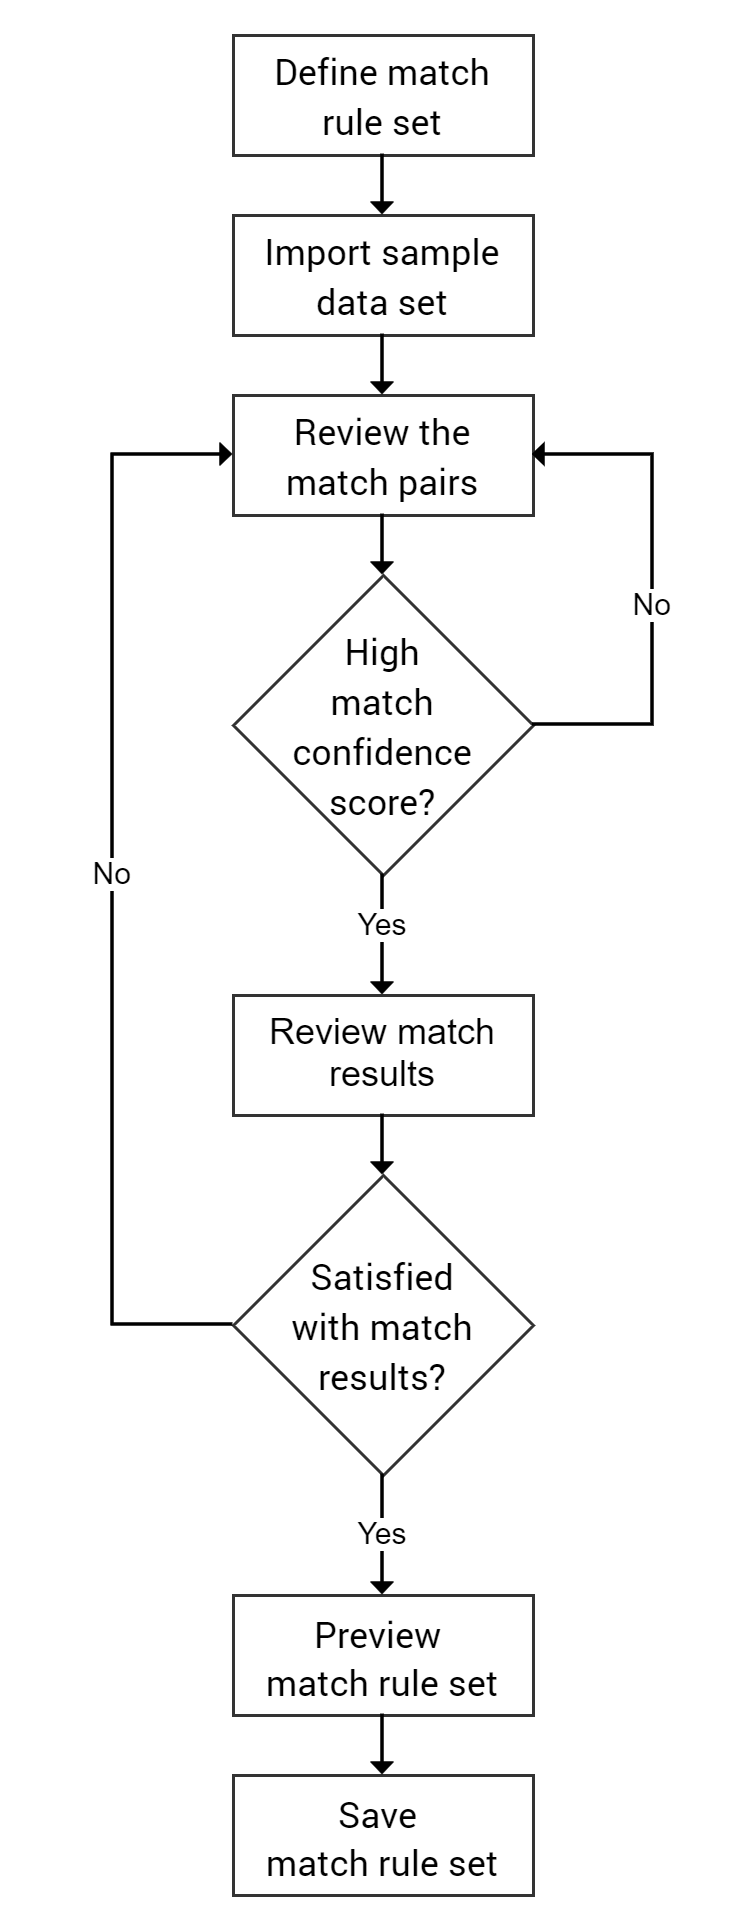 The flowchart contains the following tasks: define match rule set, import sample data, review the match pairs, low match confidence score - review match pairs, high match confidence score - review match results, not satisfied with match results - review match pairs, satisfied with match results - preview and save match rule set. 
			 